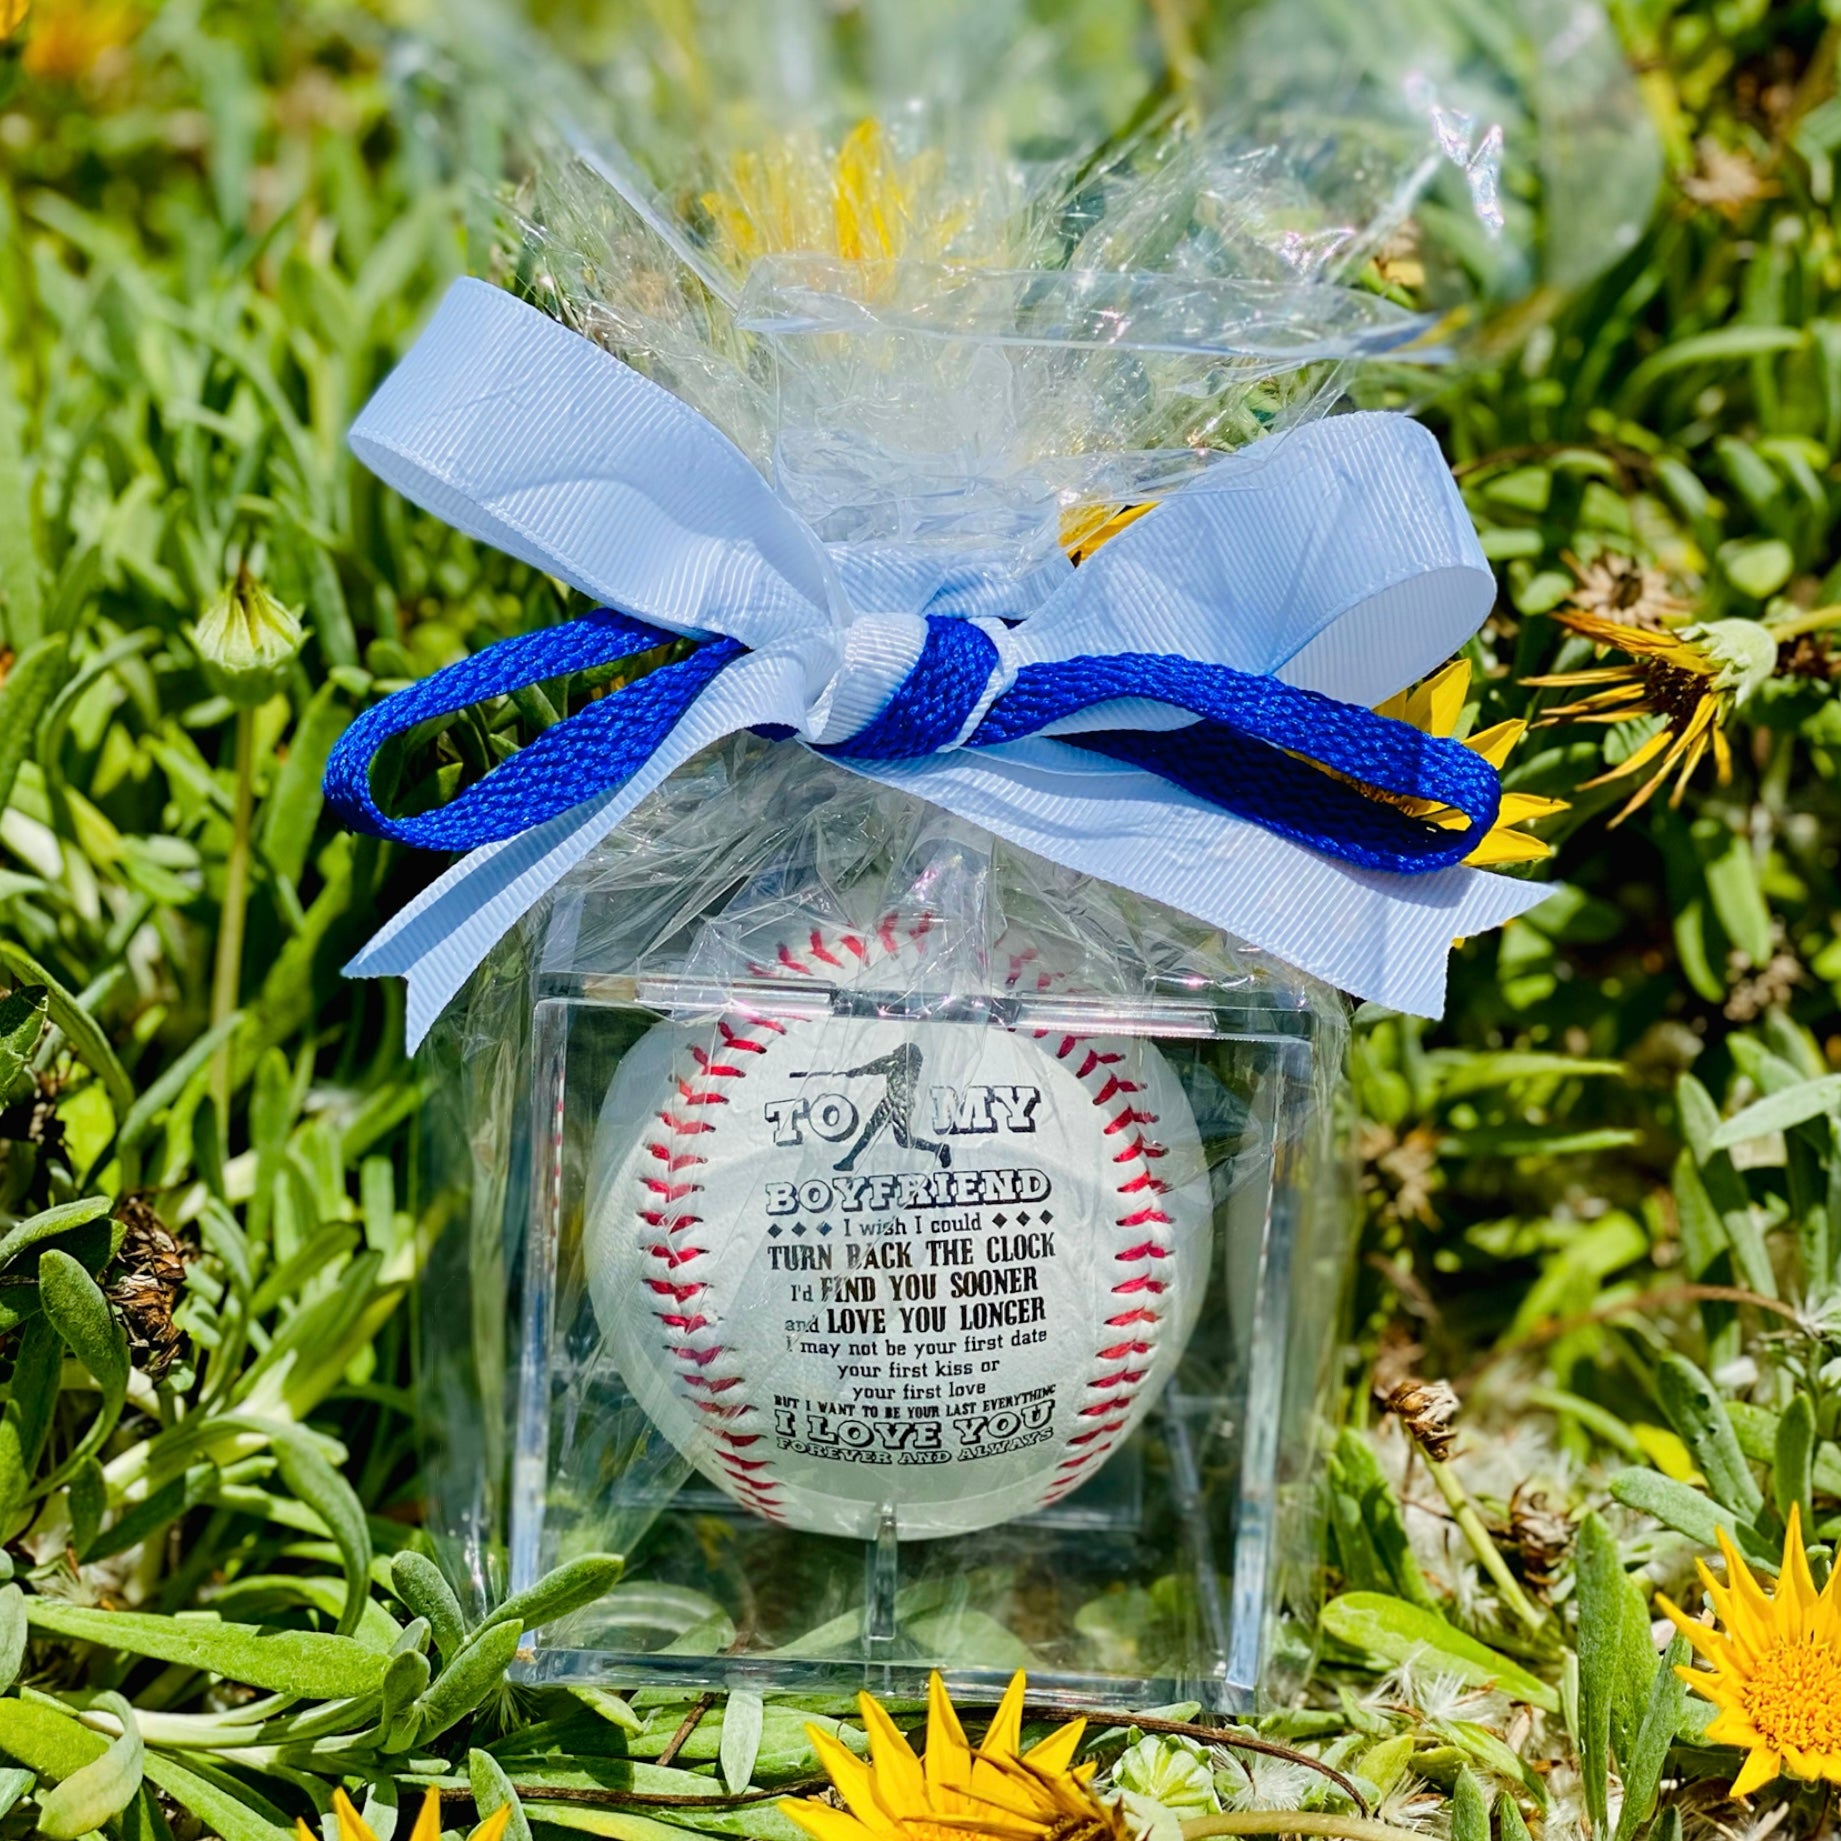 69 Gift Ideas That Will Score Big with Baseball Fans - Groovy Guy Gifts